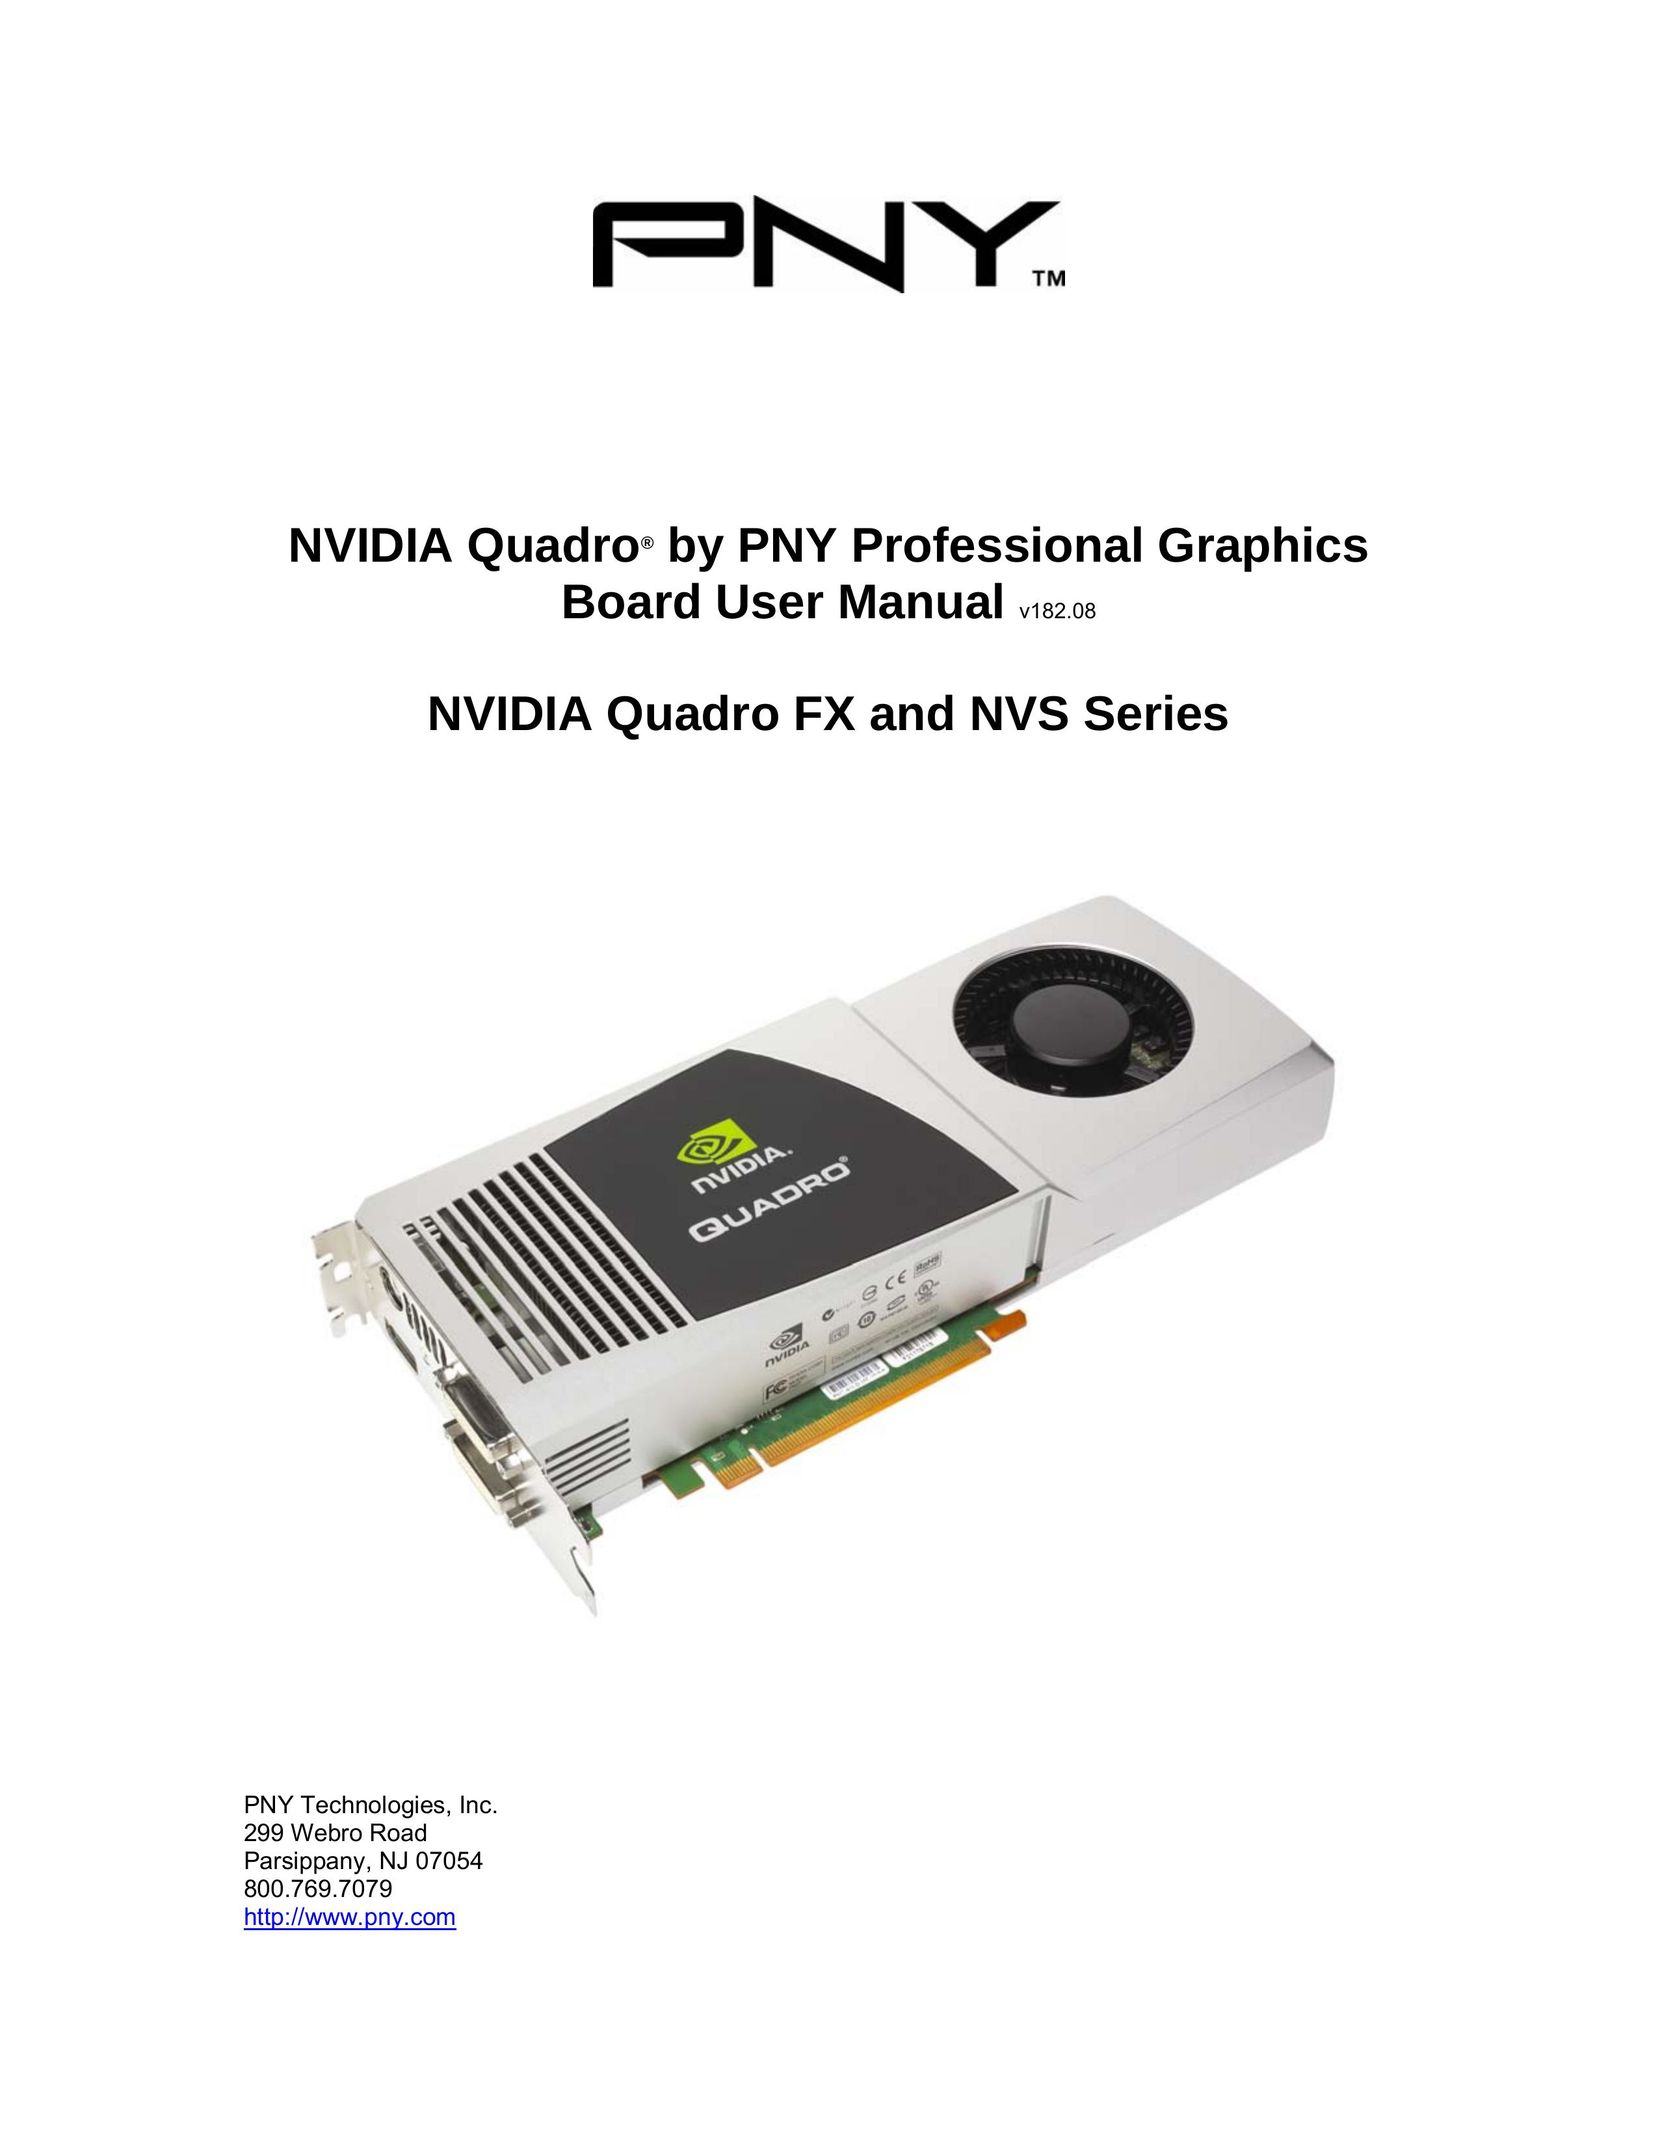 PNY FX 380 Computer Hardware User Manual